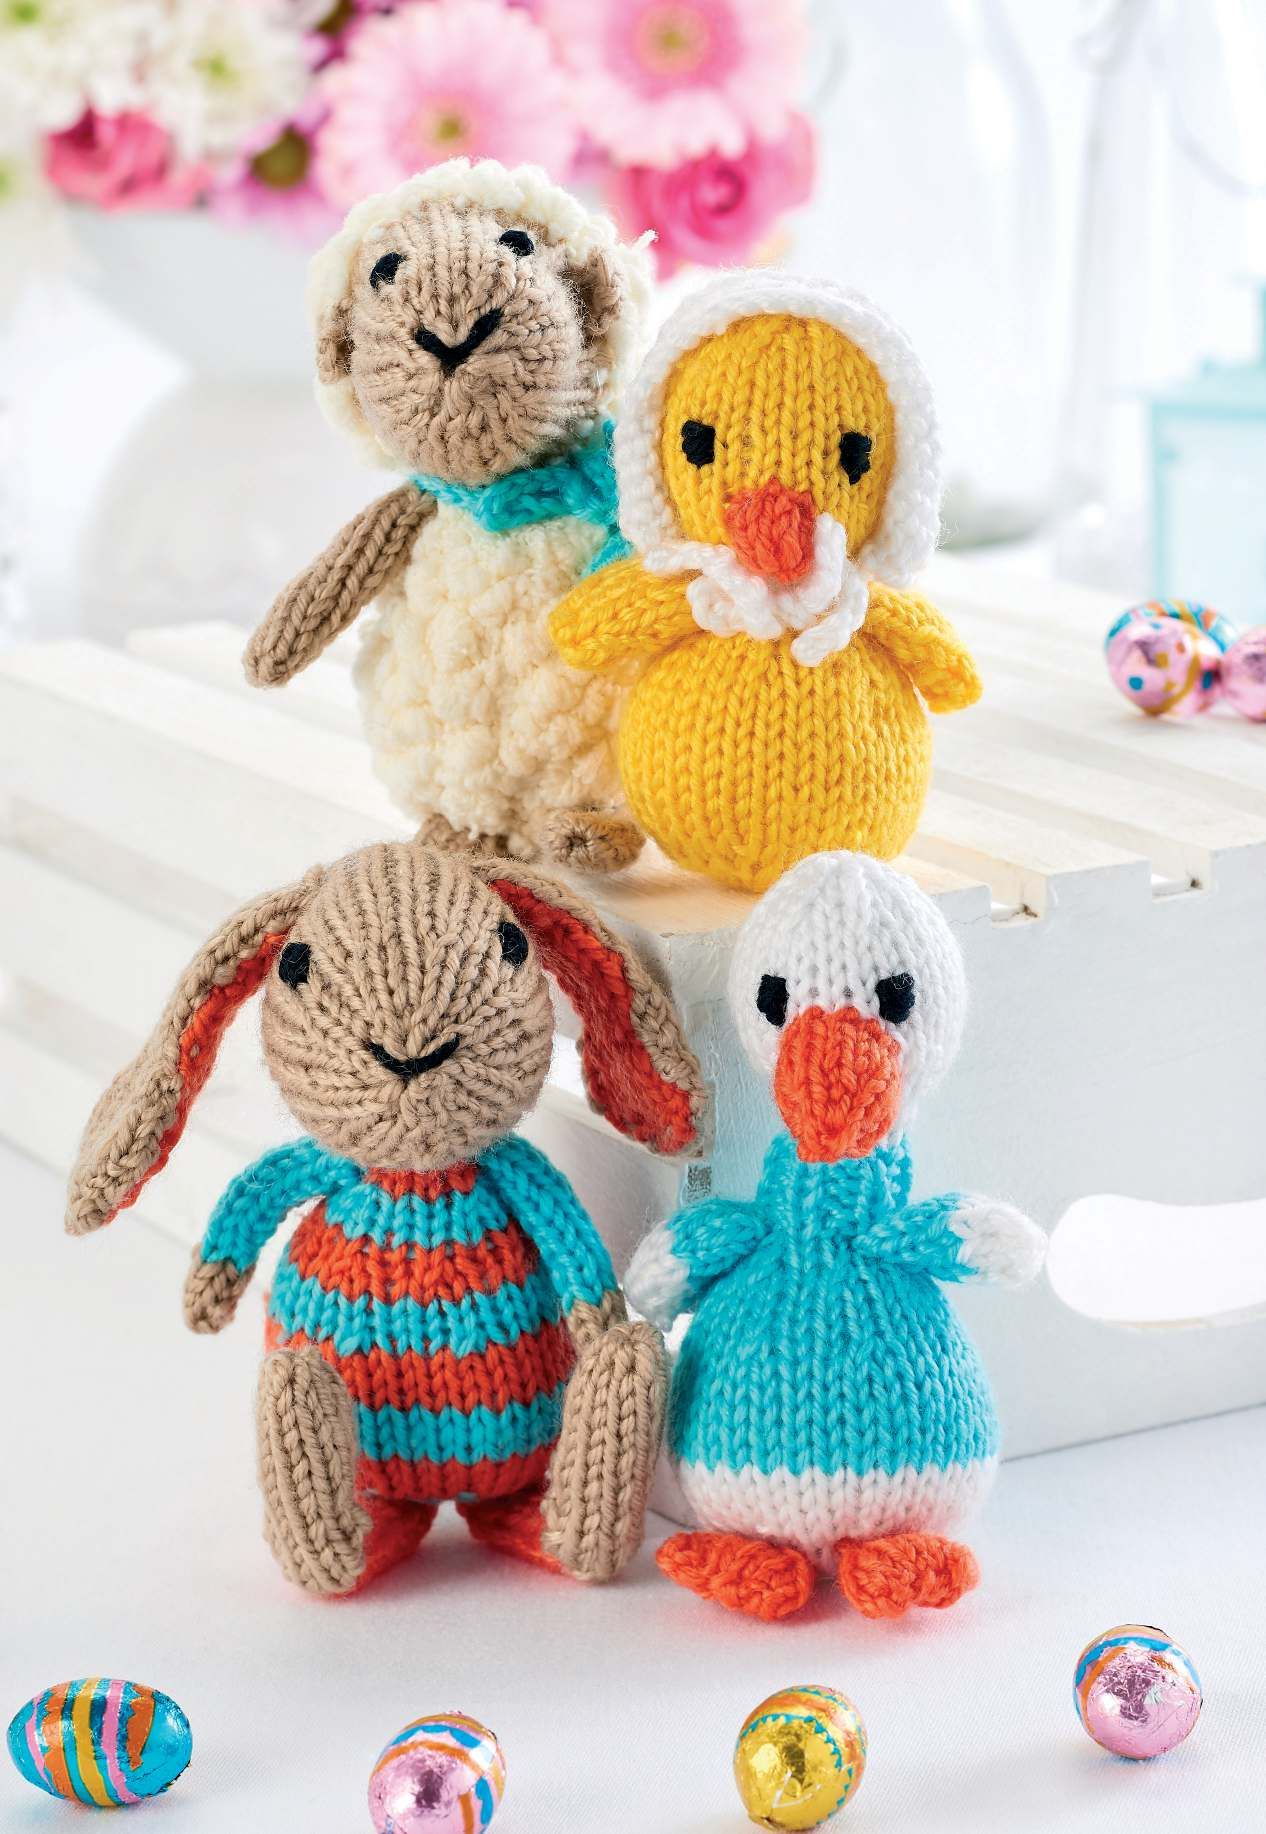 Quick Knit Easter Toys Knitting Patterns Let's Knit Magazine